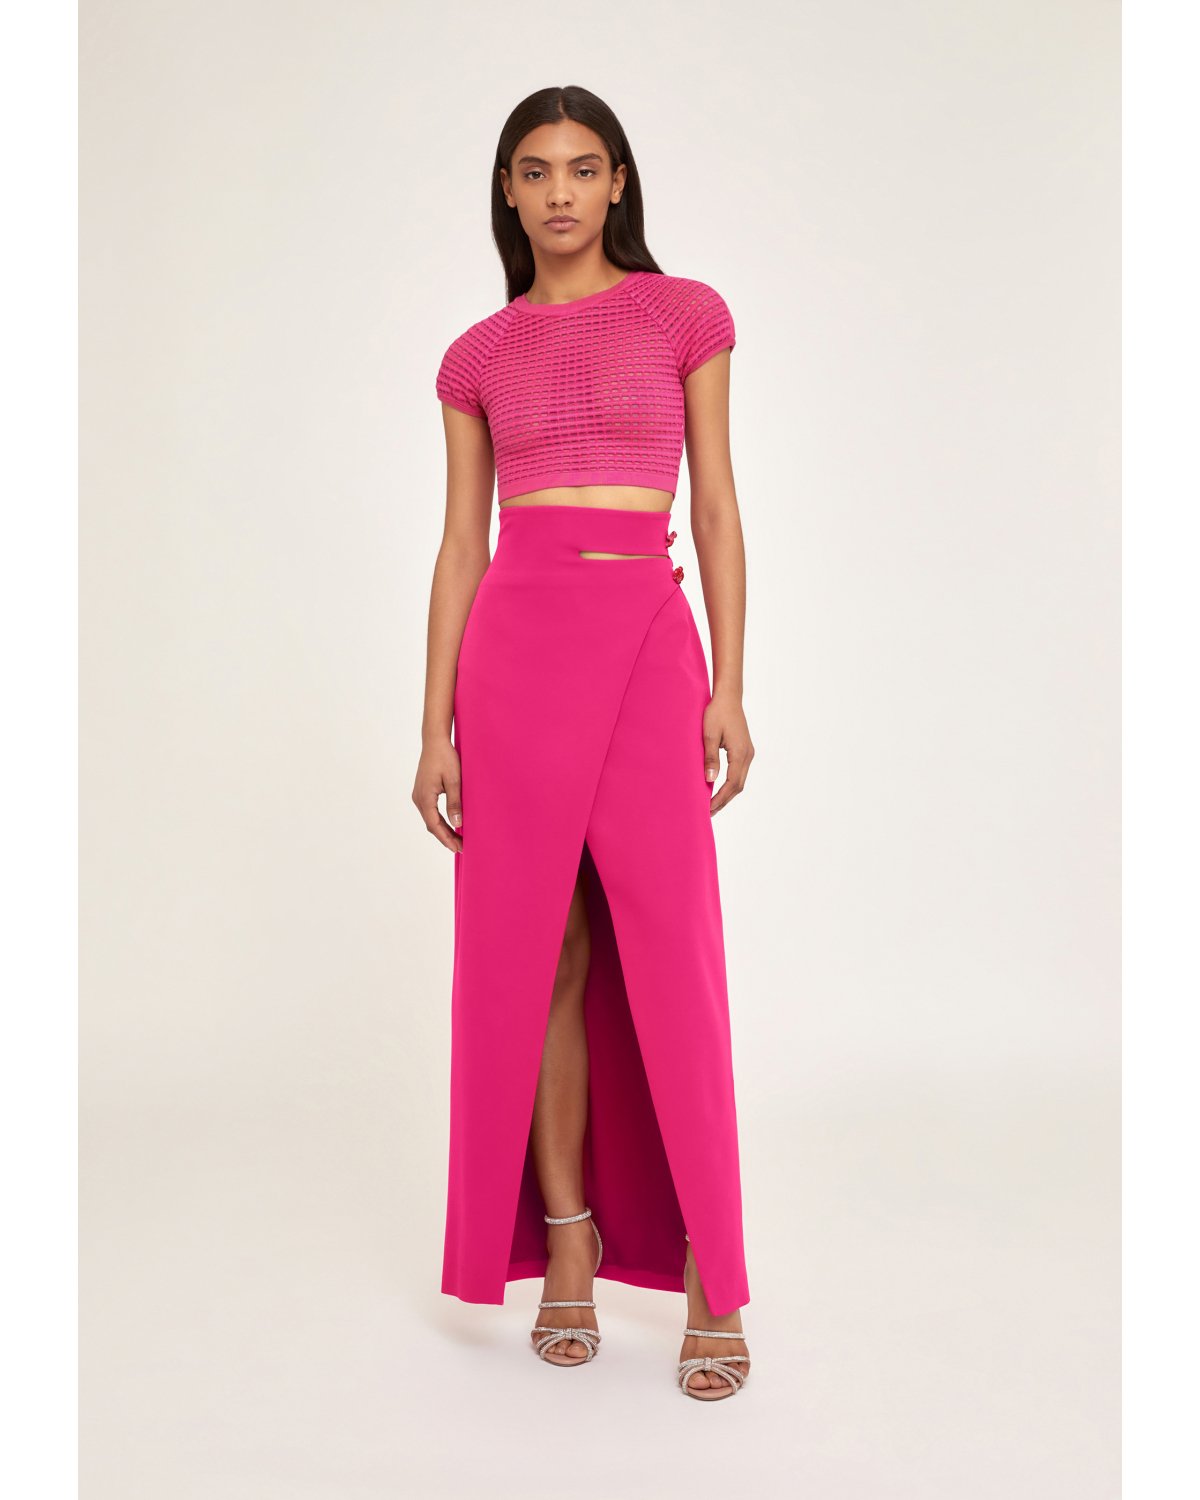 Fuchsia iconic crop top | gregoracci-carousel-3, Iconic Capsule Collection, 73_74 | Genny